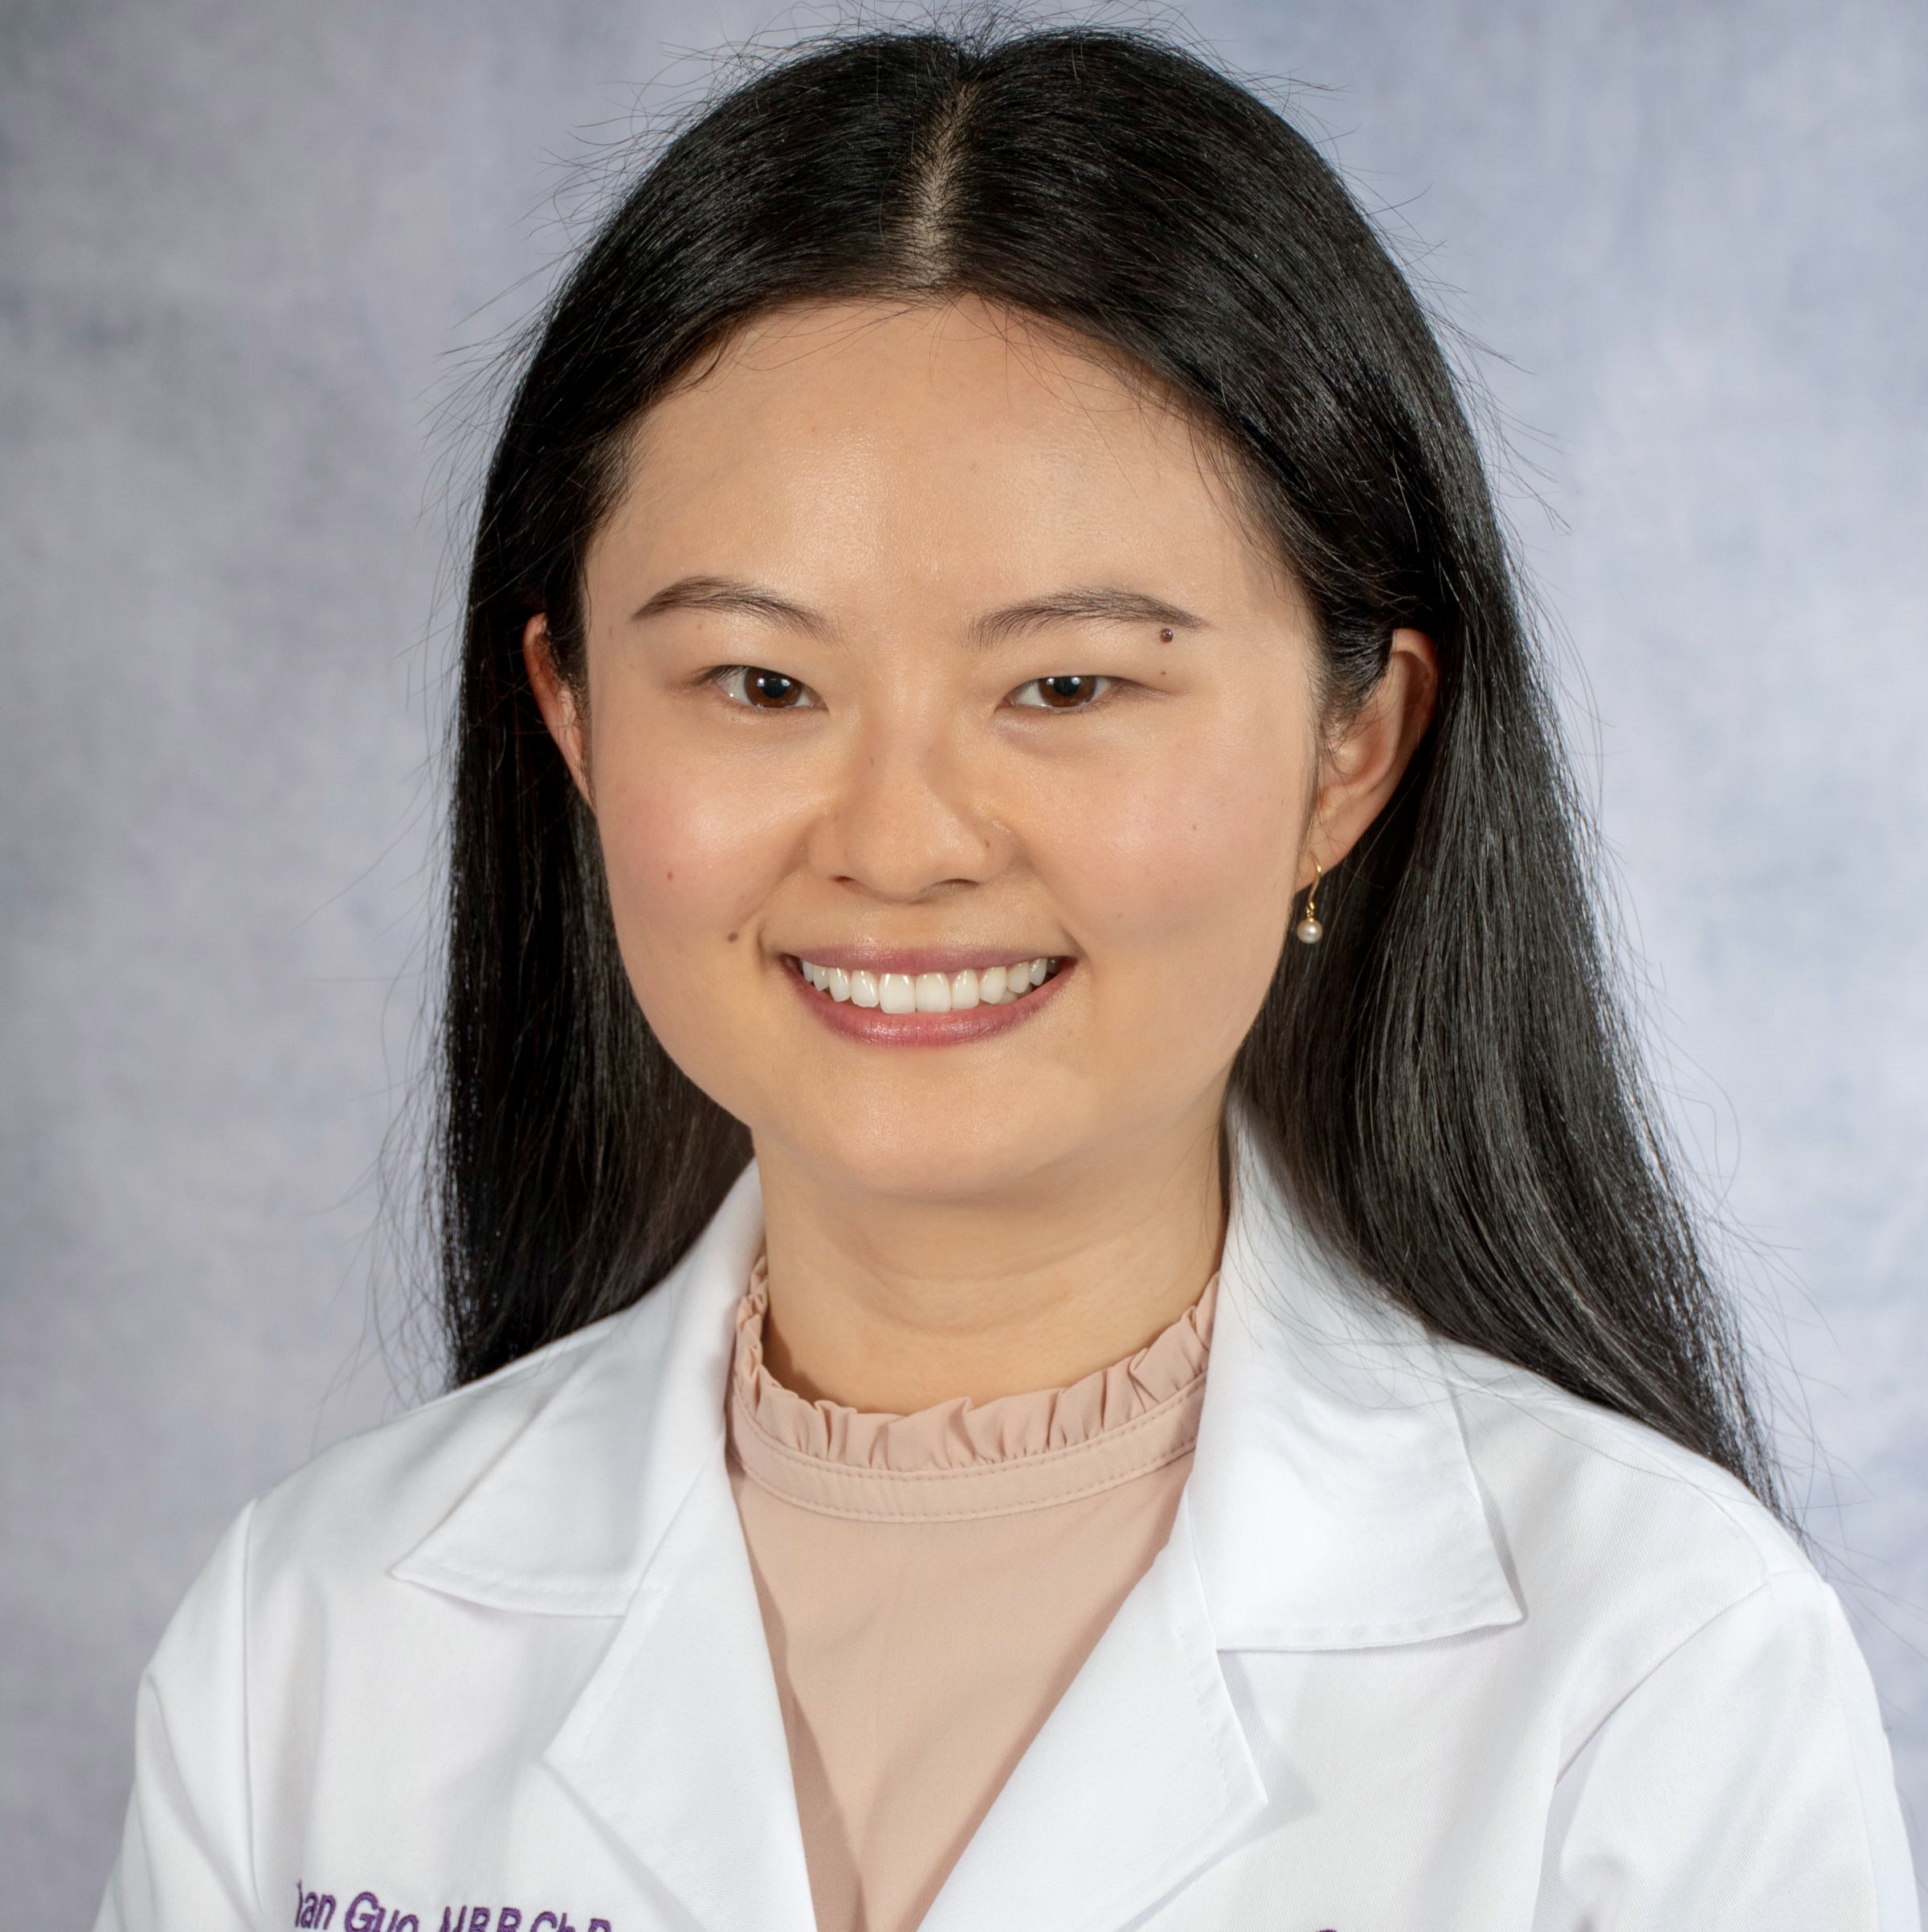 A friendly headshot of Dr. Guo